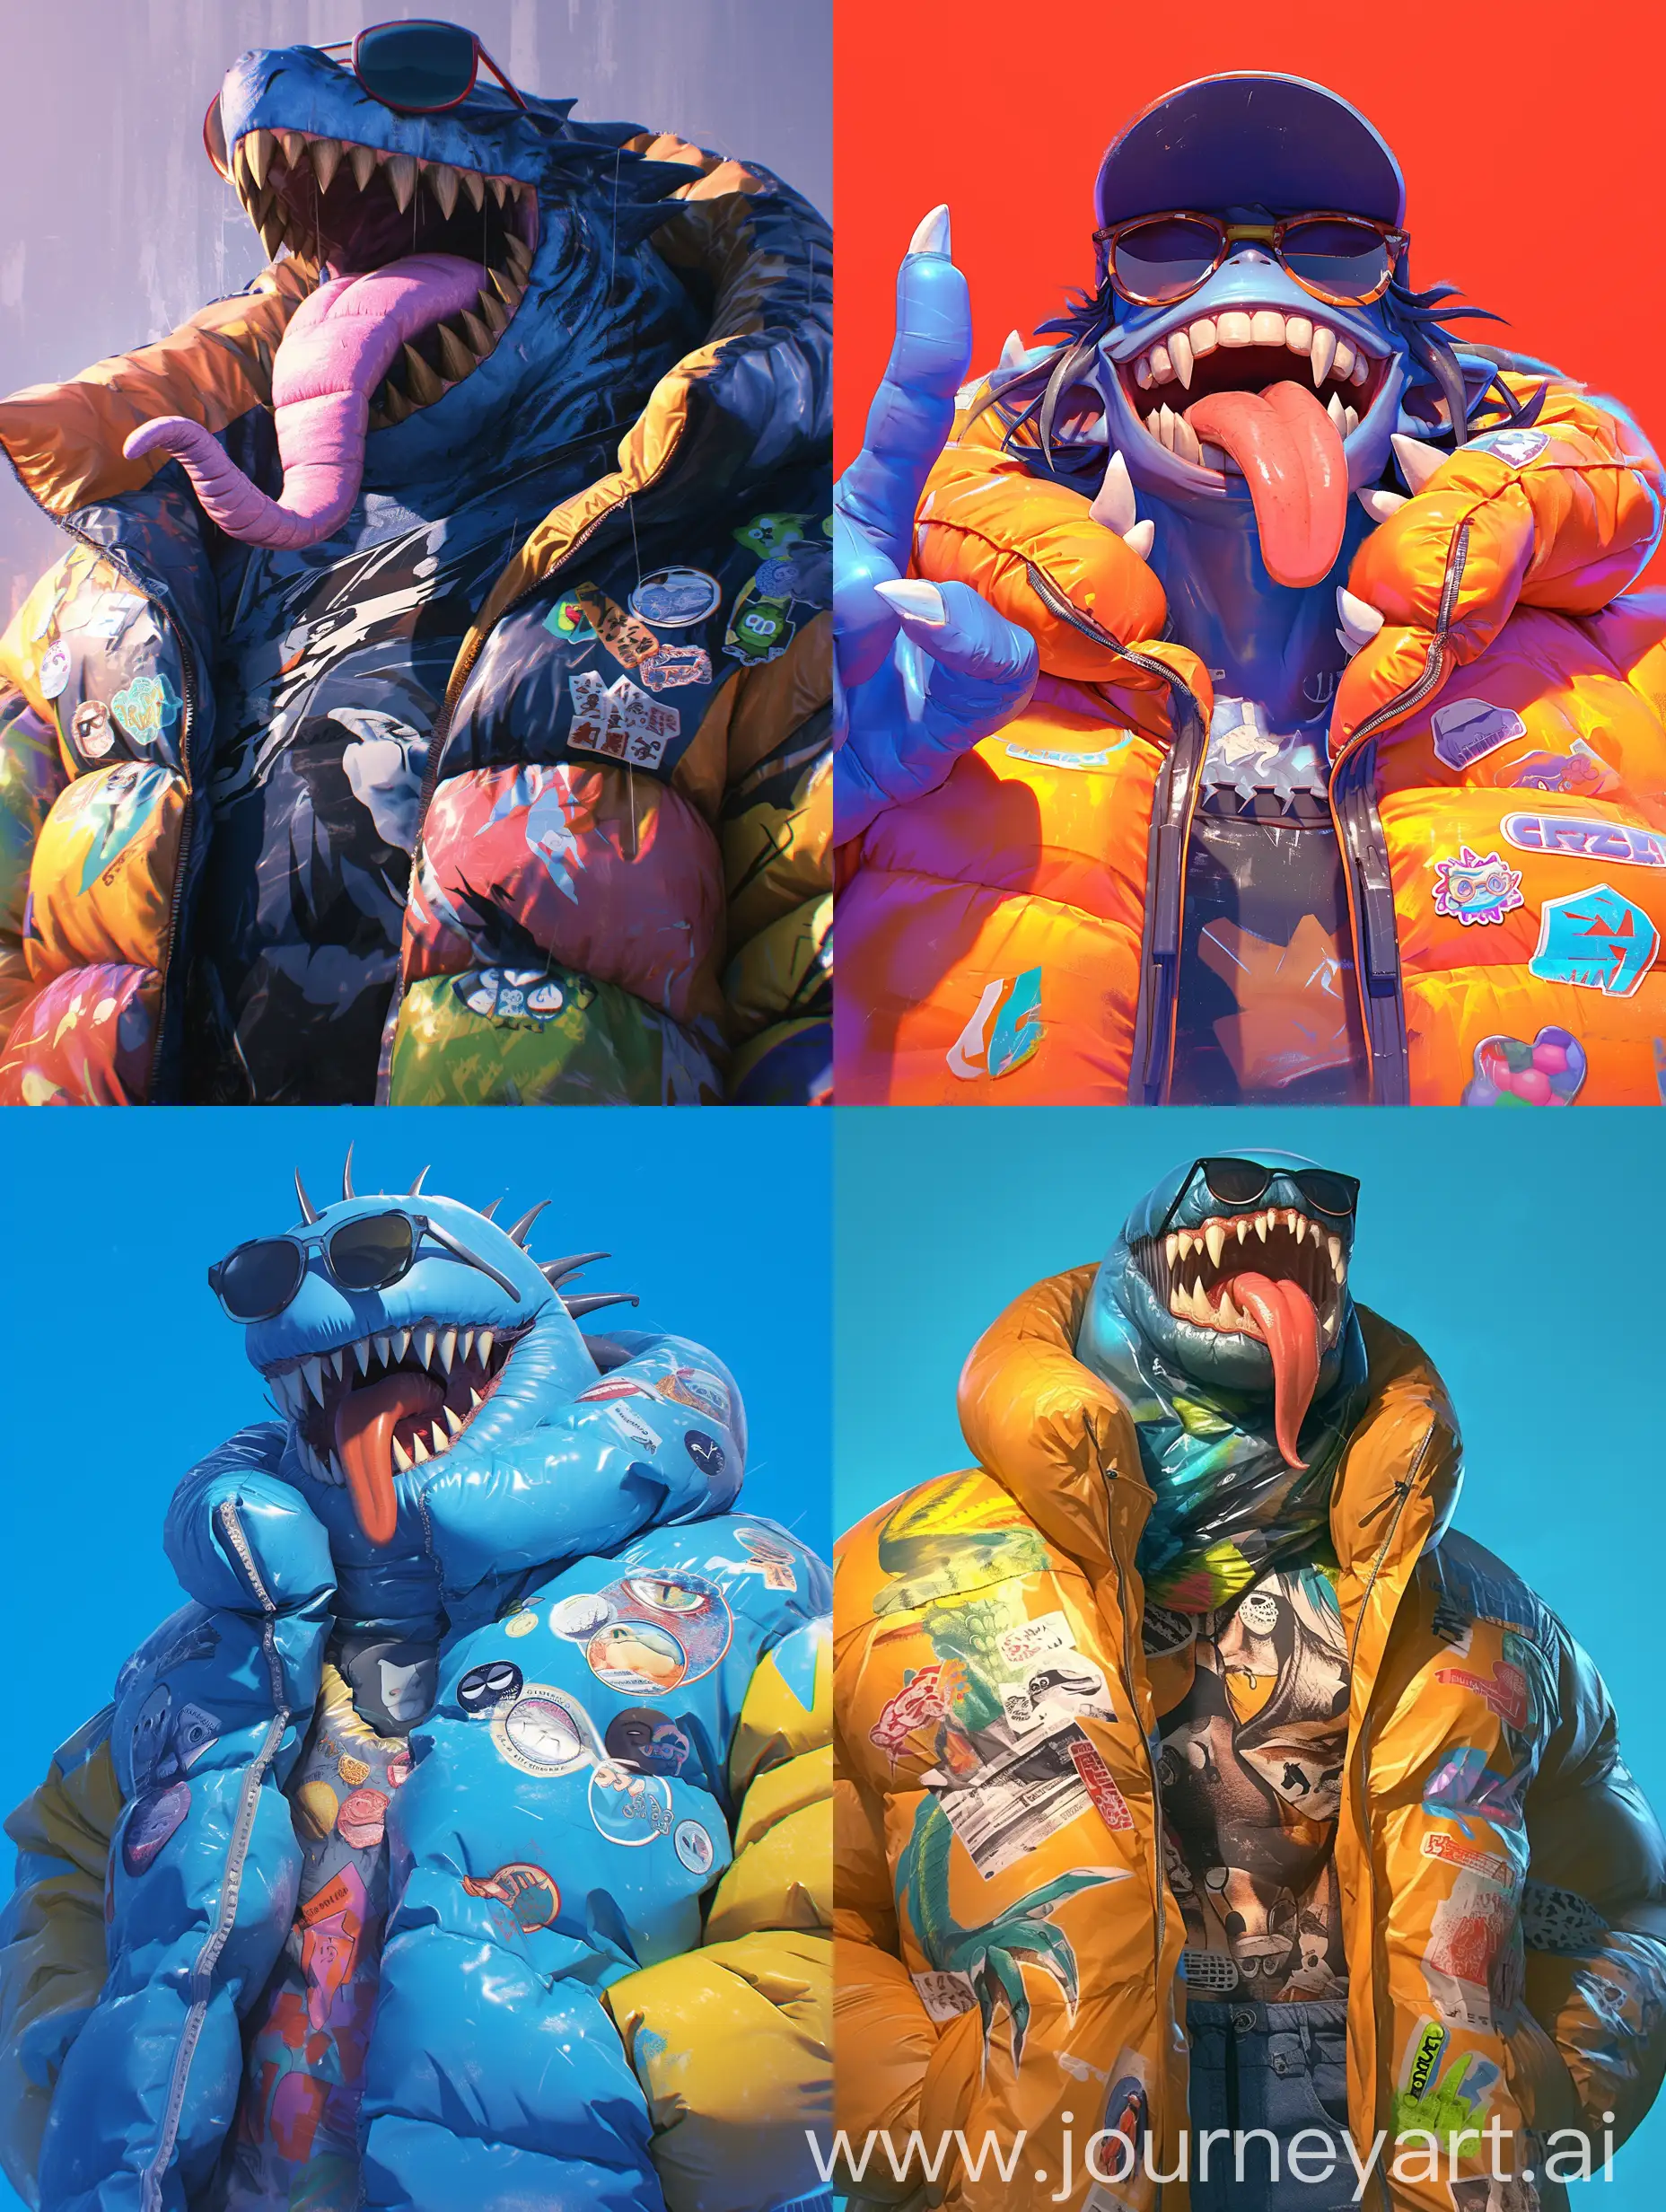 Playful-NFT-Monster-Character-in-Vibrant-Puffy-Jacket-and-Sunglasses